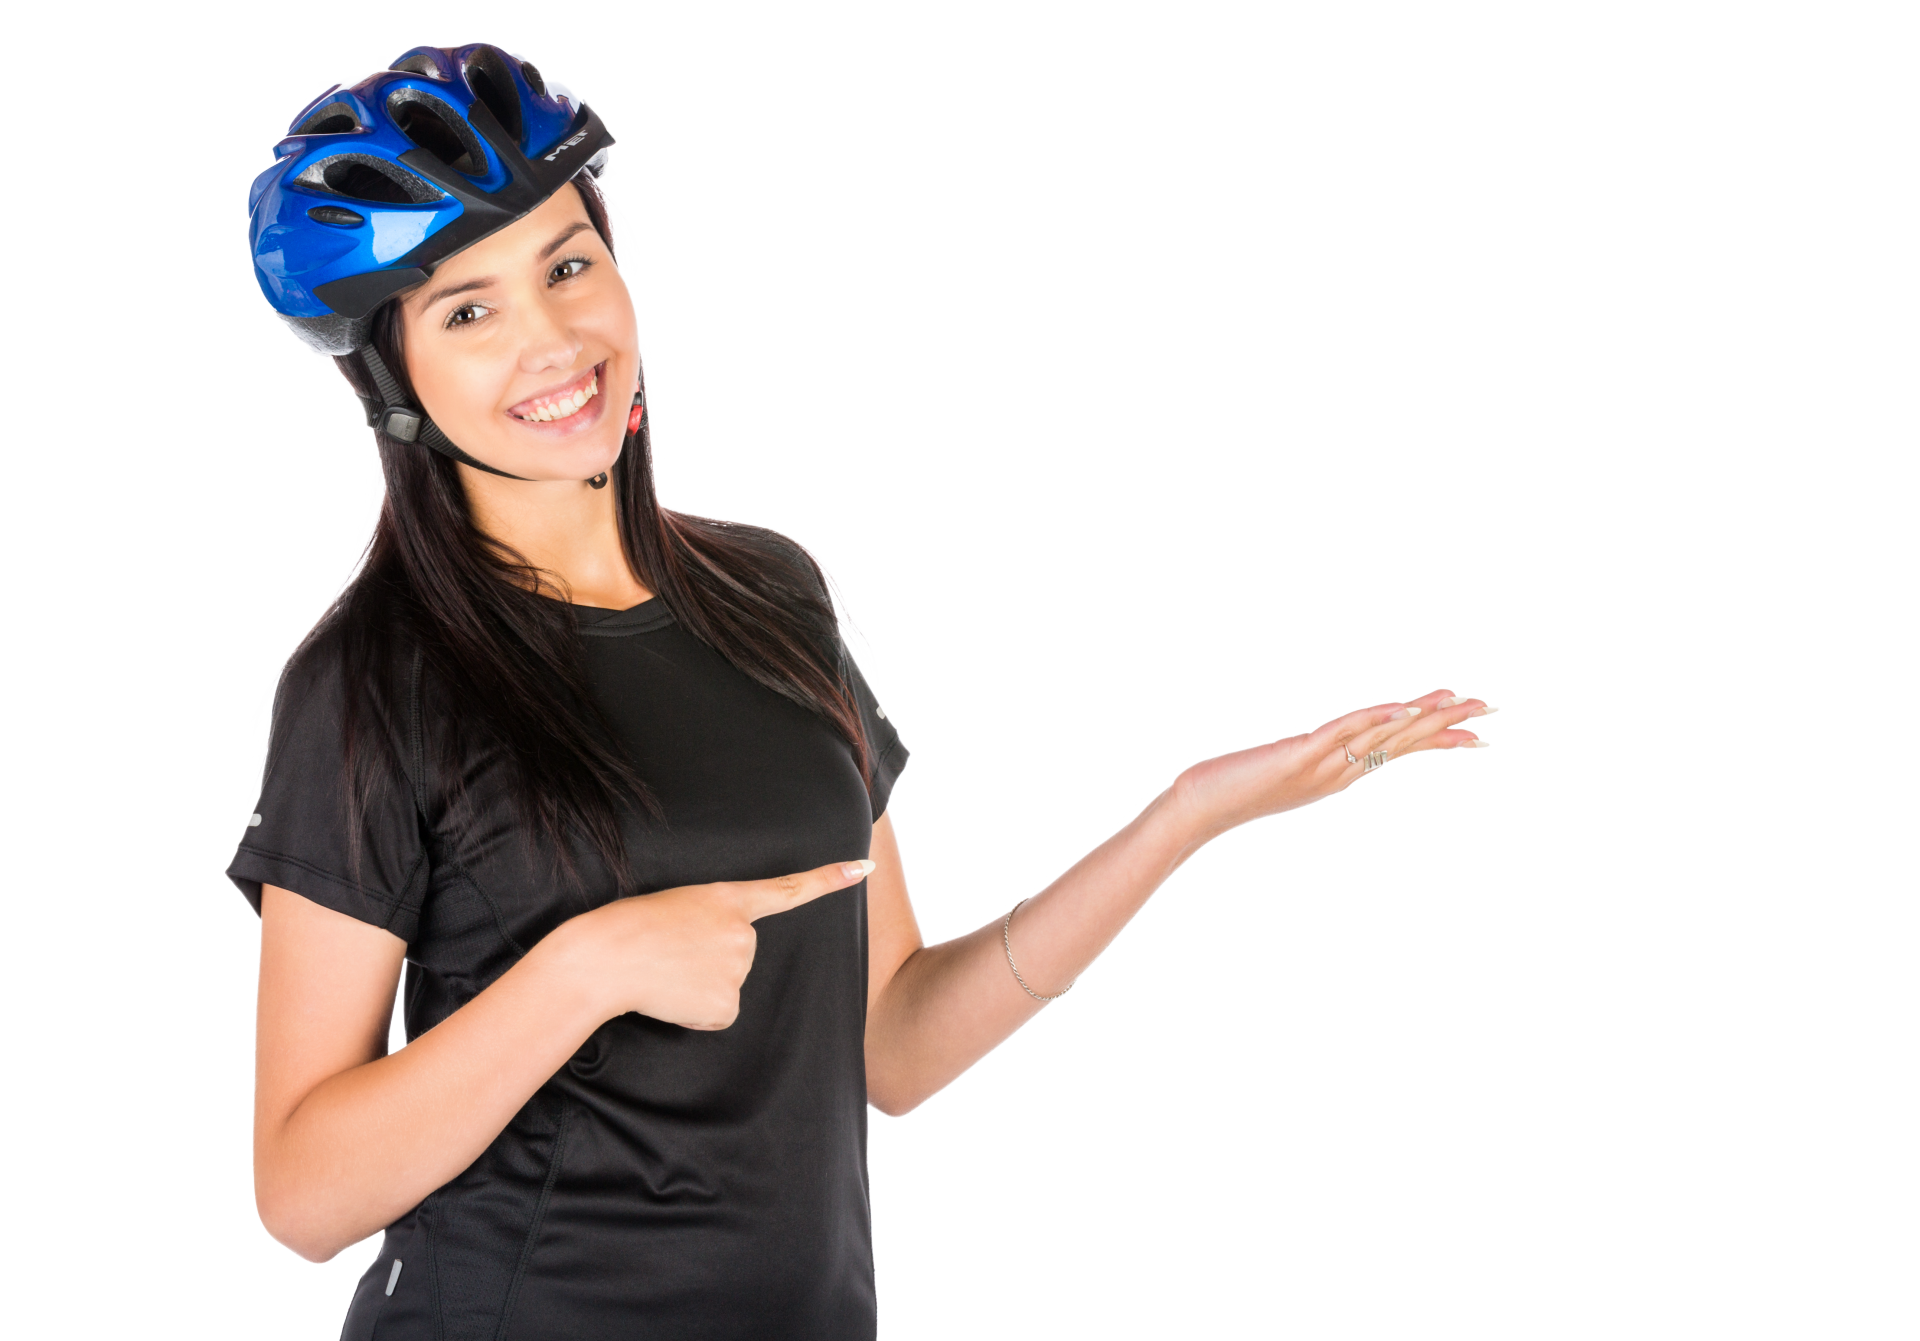 Female Cyclist Pointing